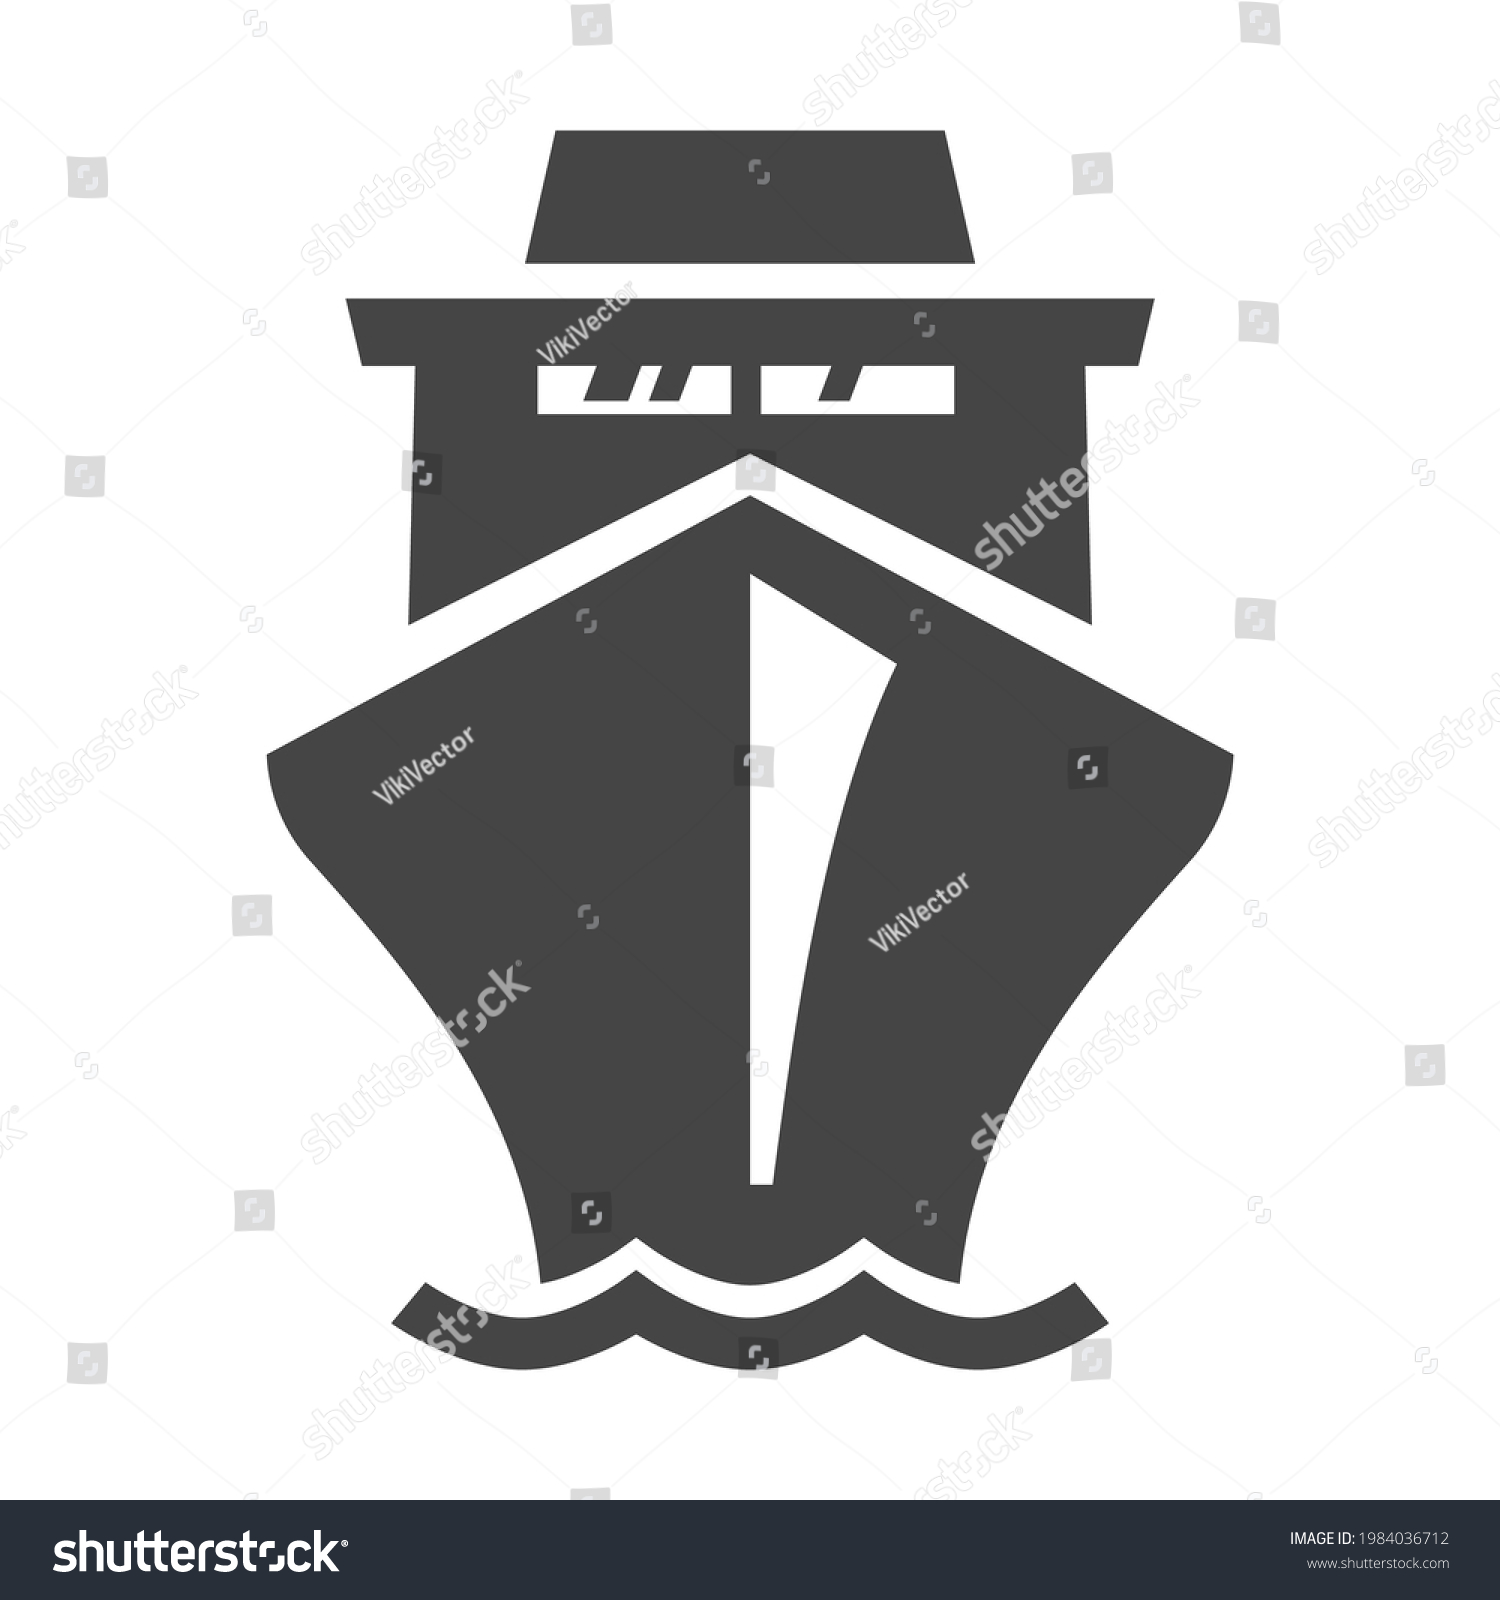 SVG of Simple monochrome liner icon vector flat illustration. Front view huge cruise ship isolated. Water transport for cargo or passenger transportation. Floating marine vessel for destination journey svg